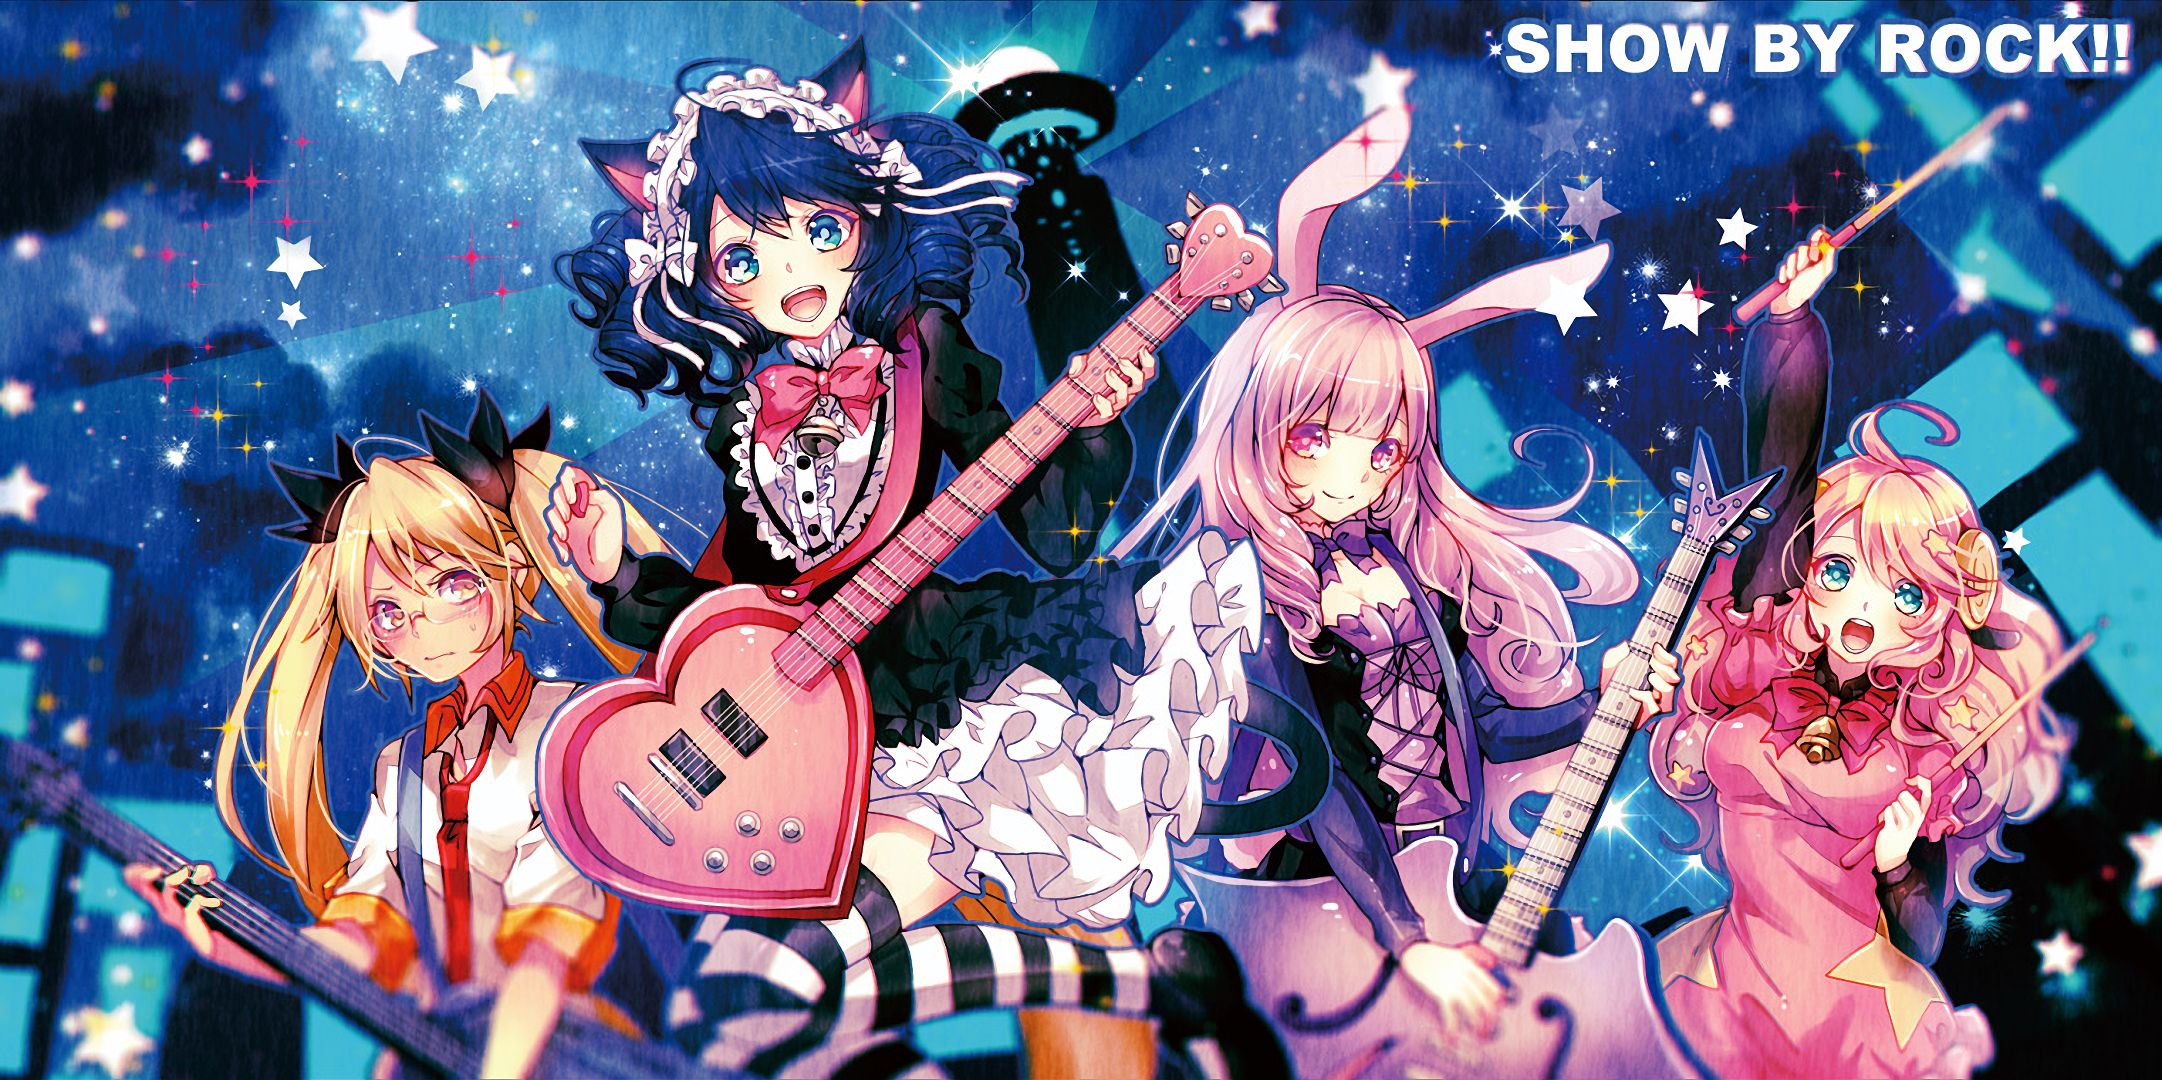 10+ Show By Rock!! HD Wallpapers and Backgrounds